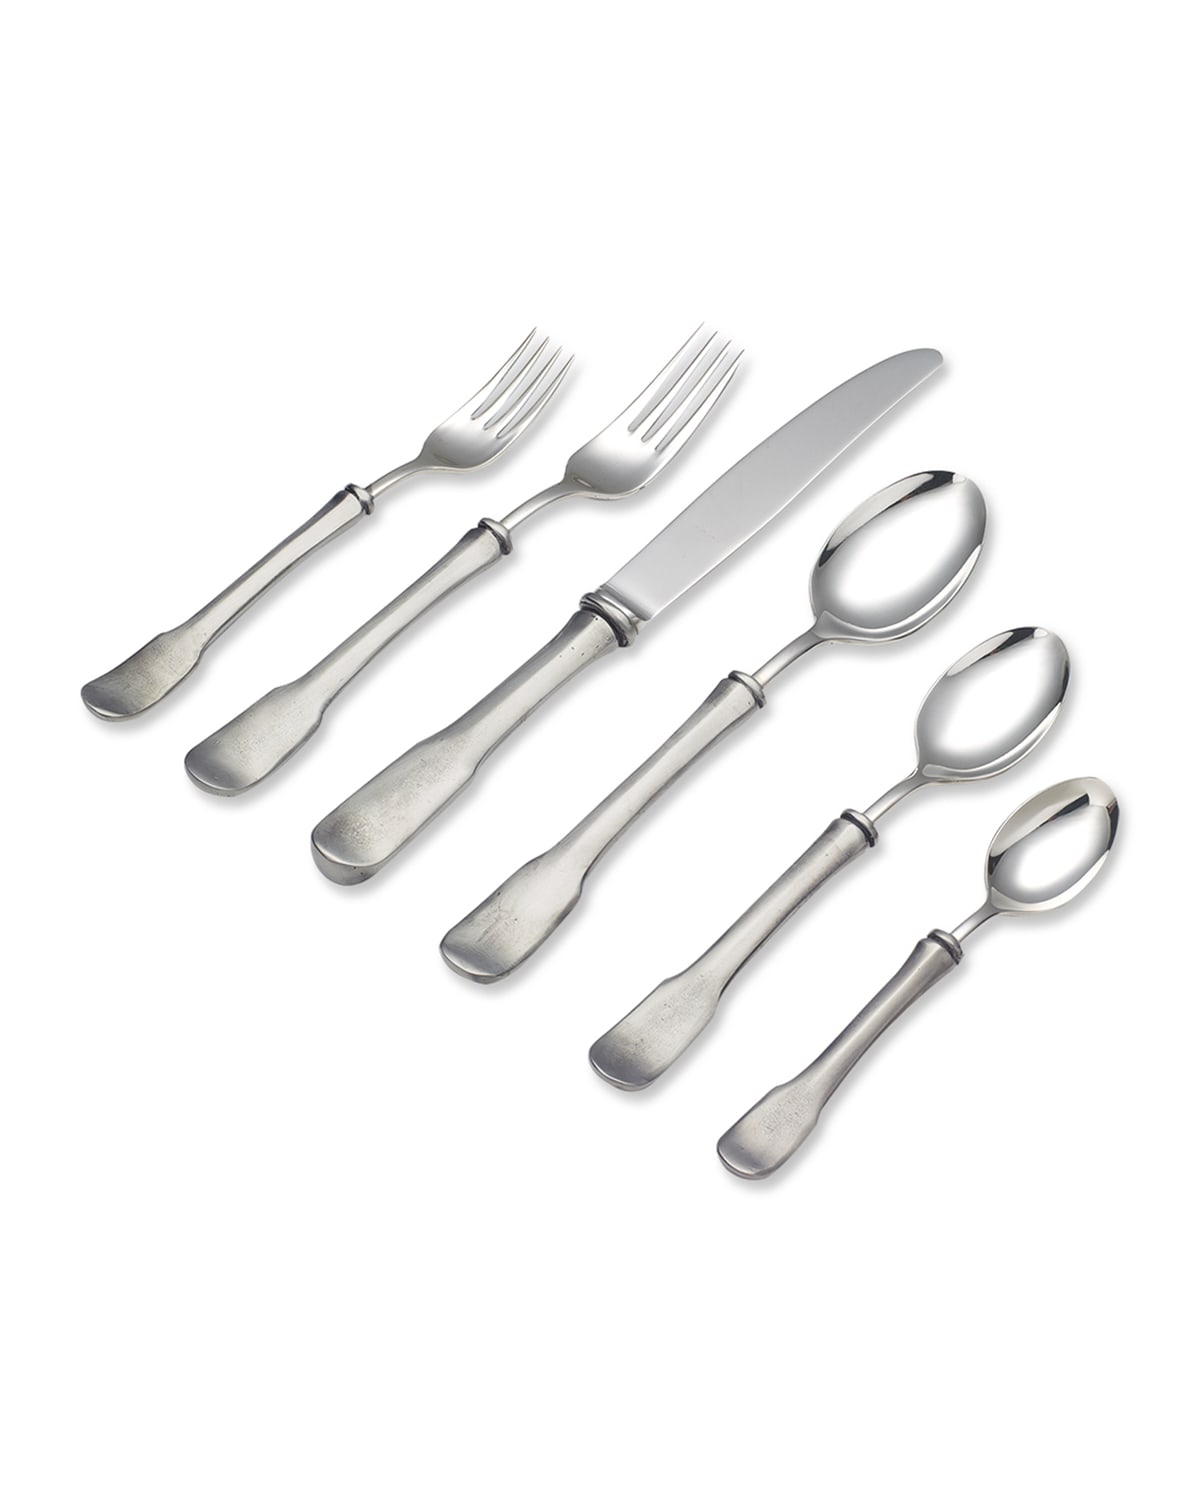 Match Olivia 6-piece Flatware Place Setting In Gray